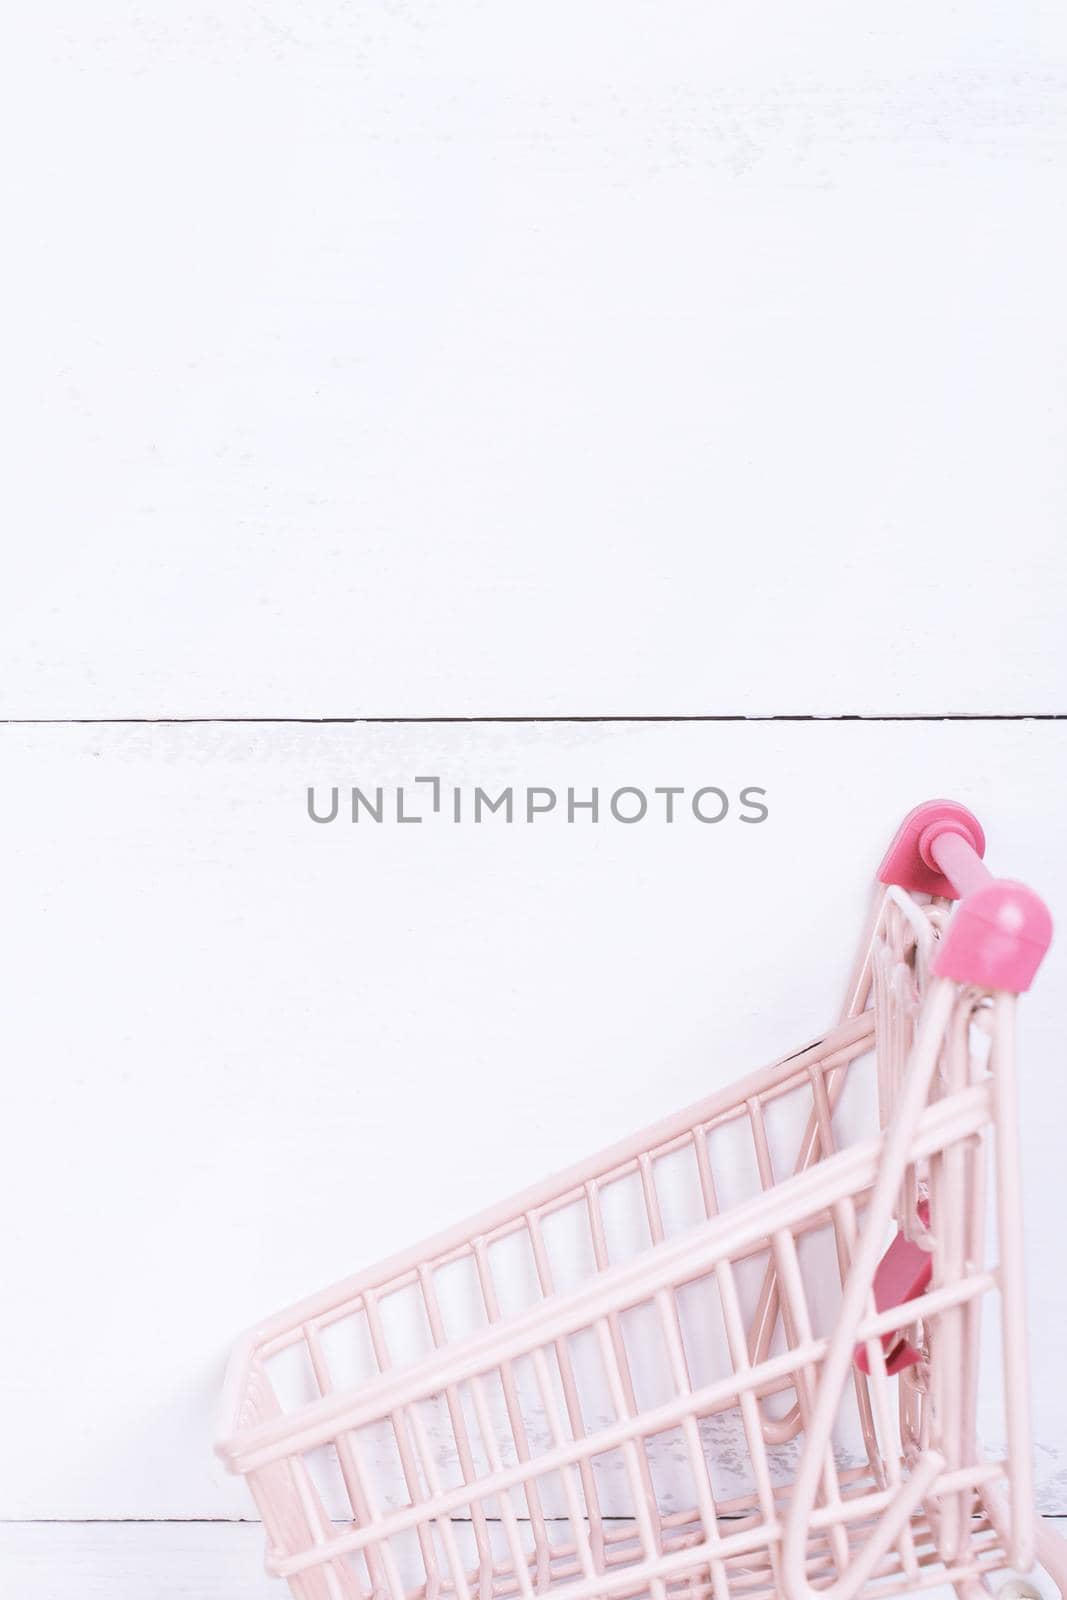 Abstract design element, annual sale, shopping season concept, mini cart with colorful paper bag on white wooden table background, top view, flat lay